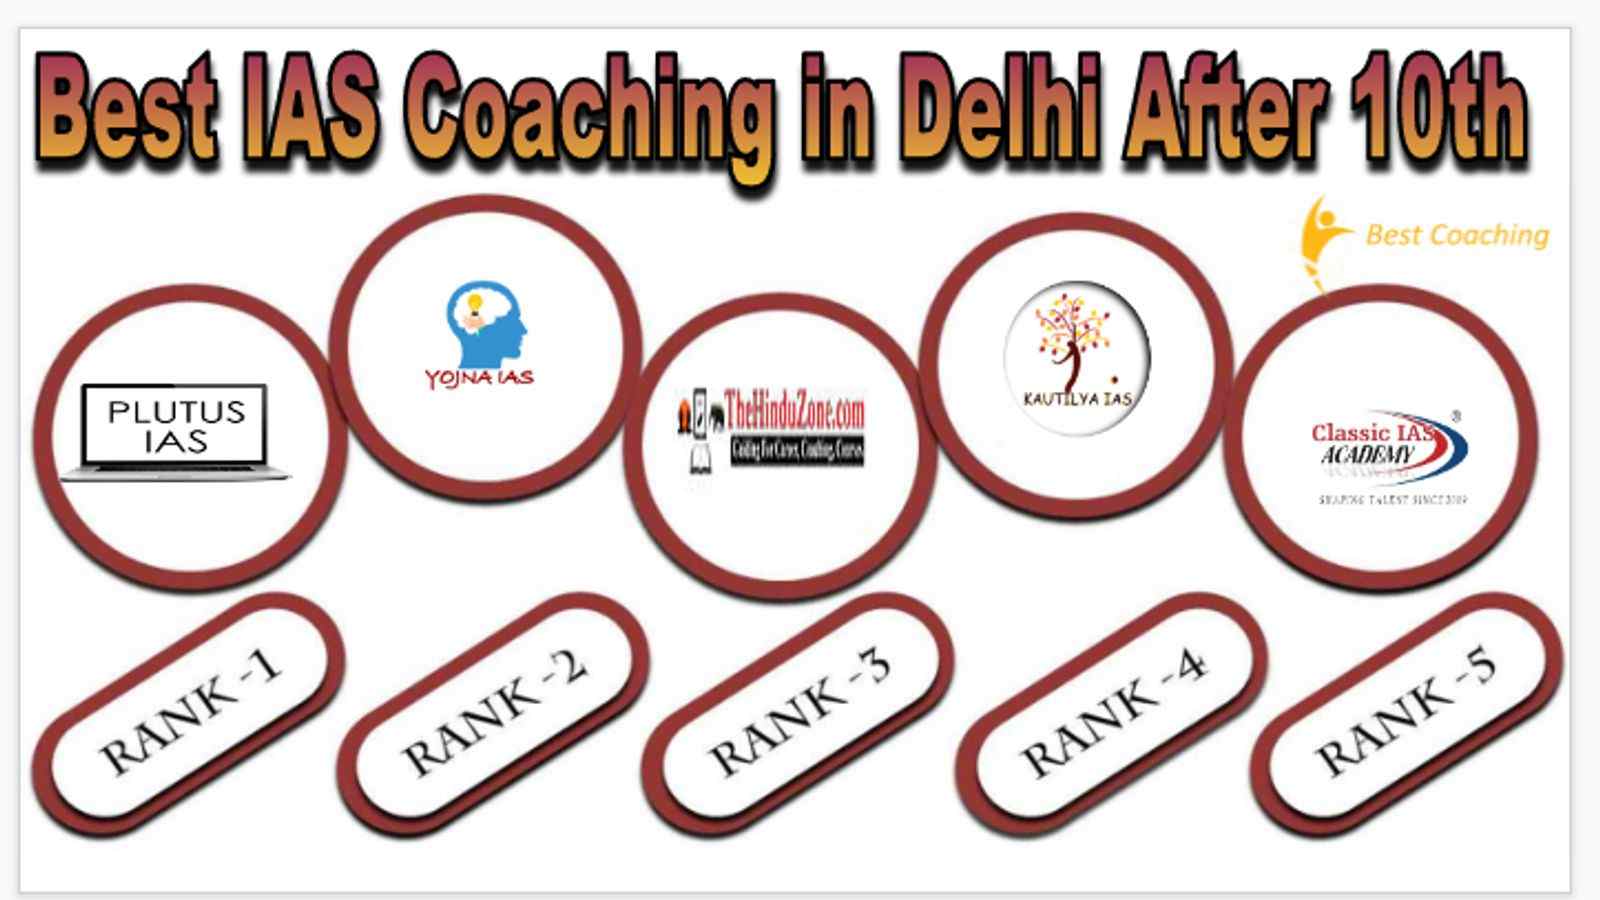 Best IAS coaching in Delhi after 10th